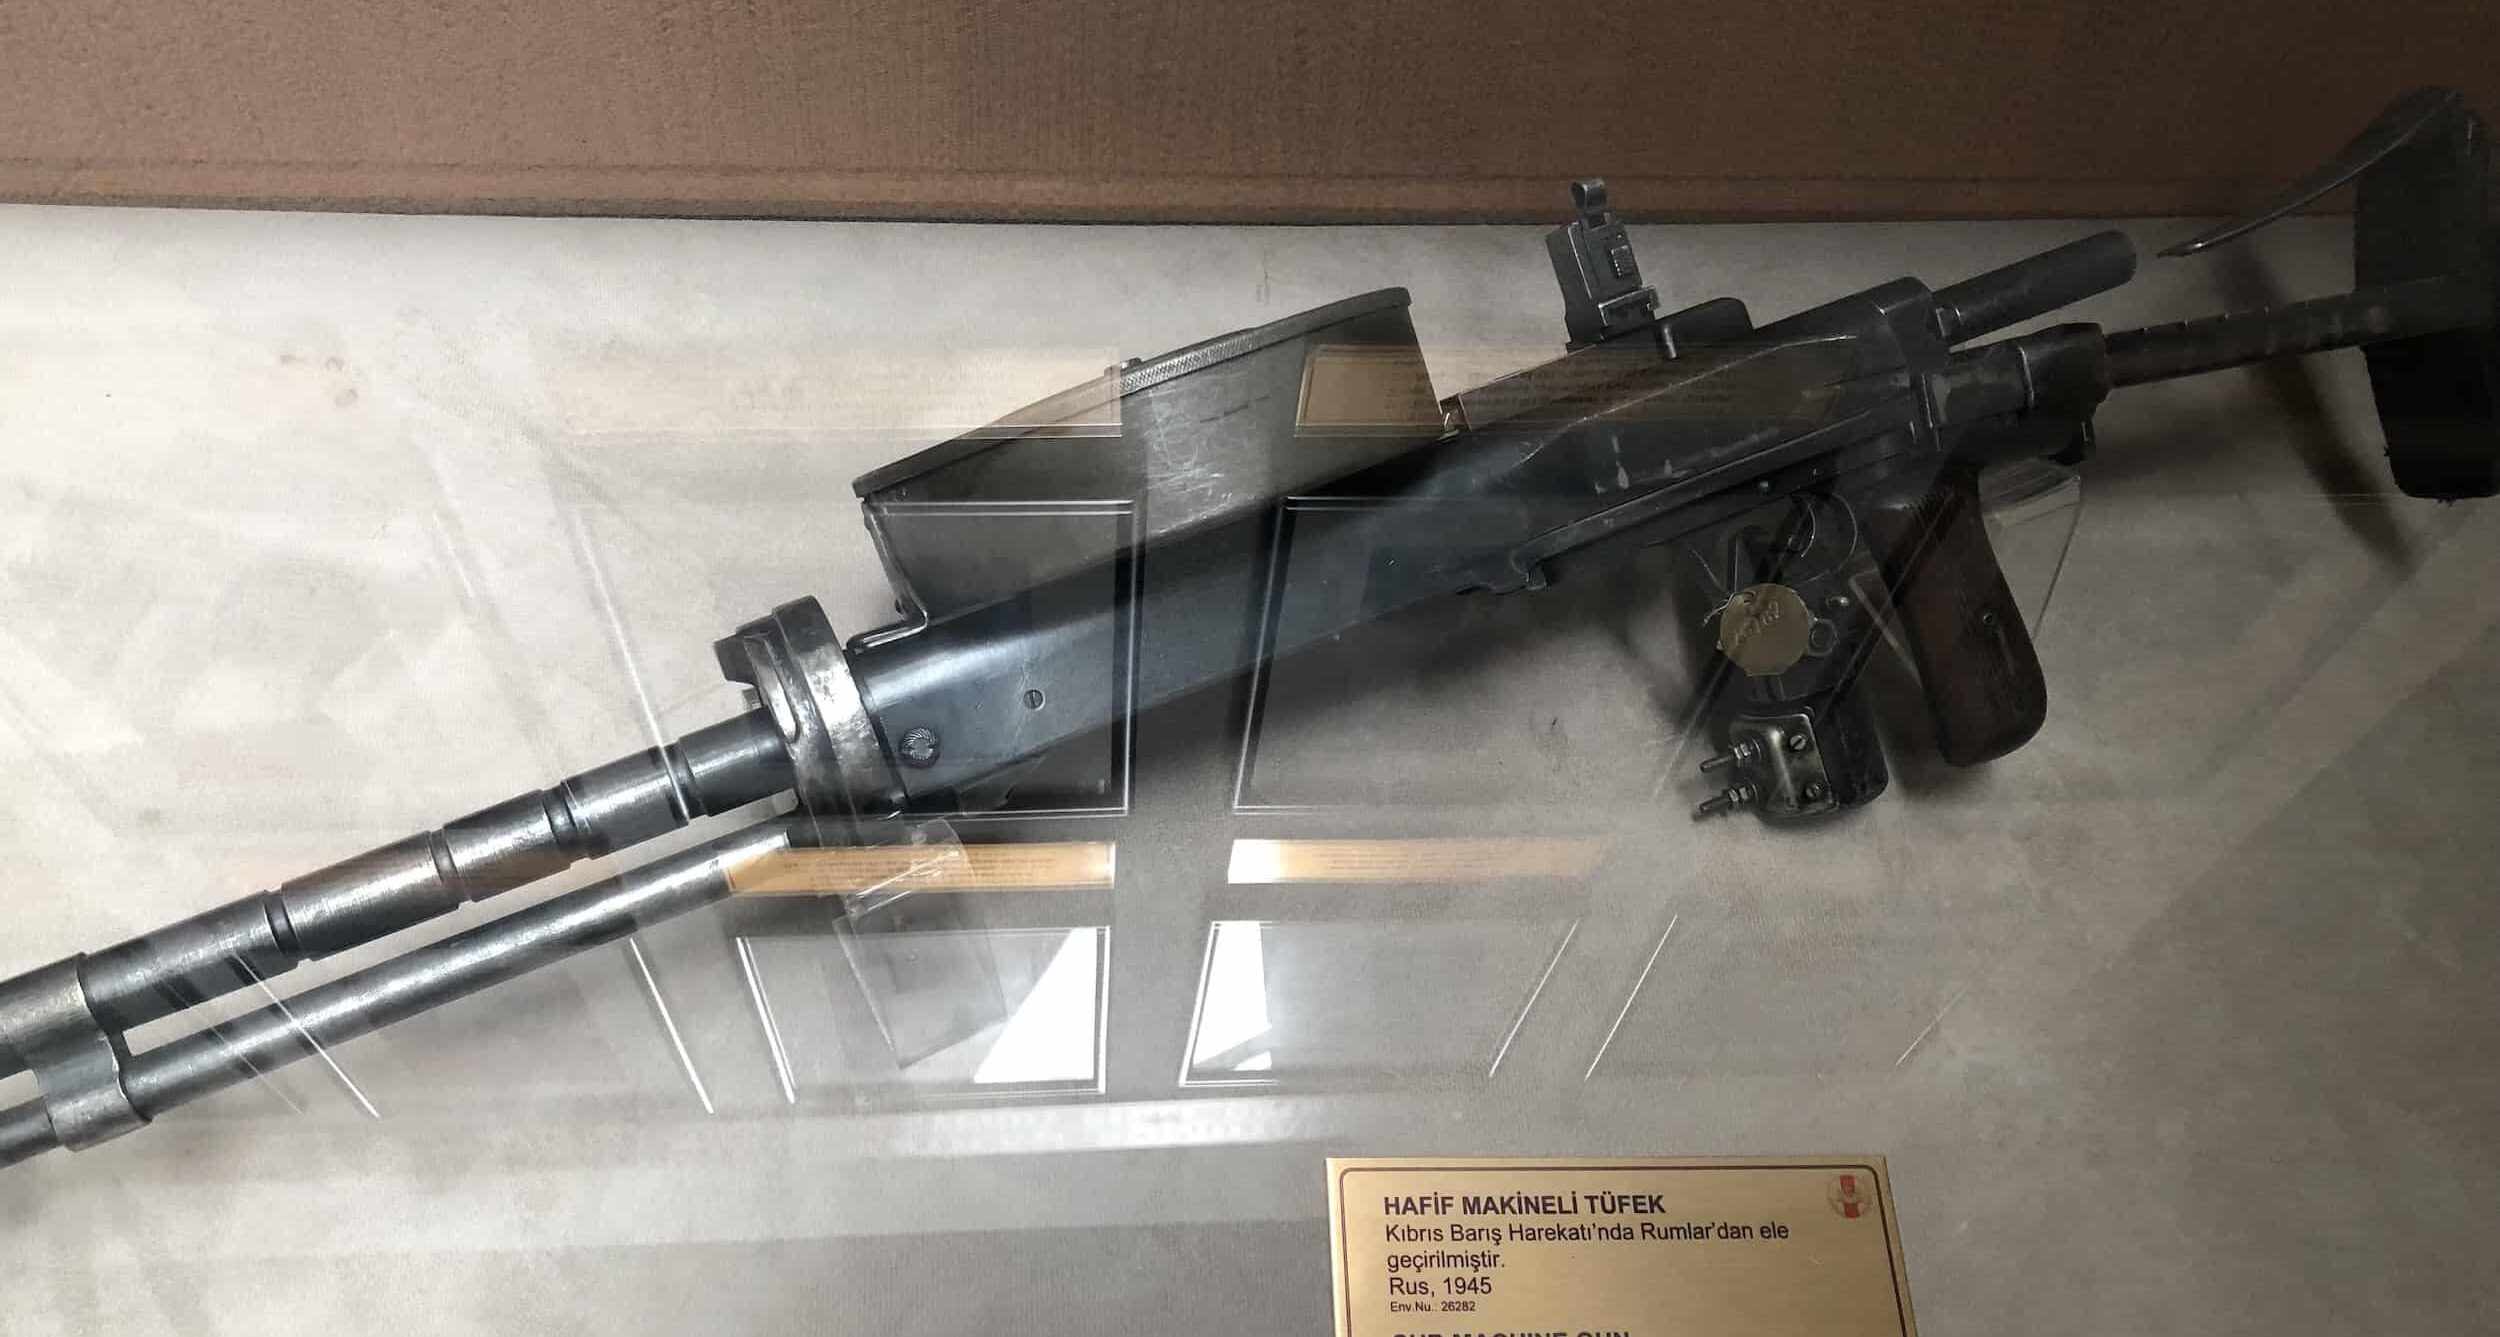 Submachine gun captured from the Greeks during the Turkish invasion of Cyprus